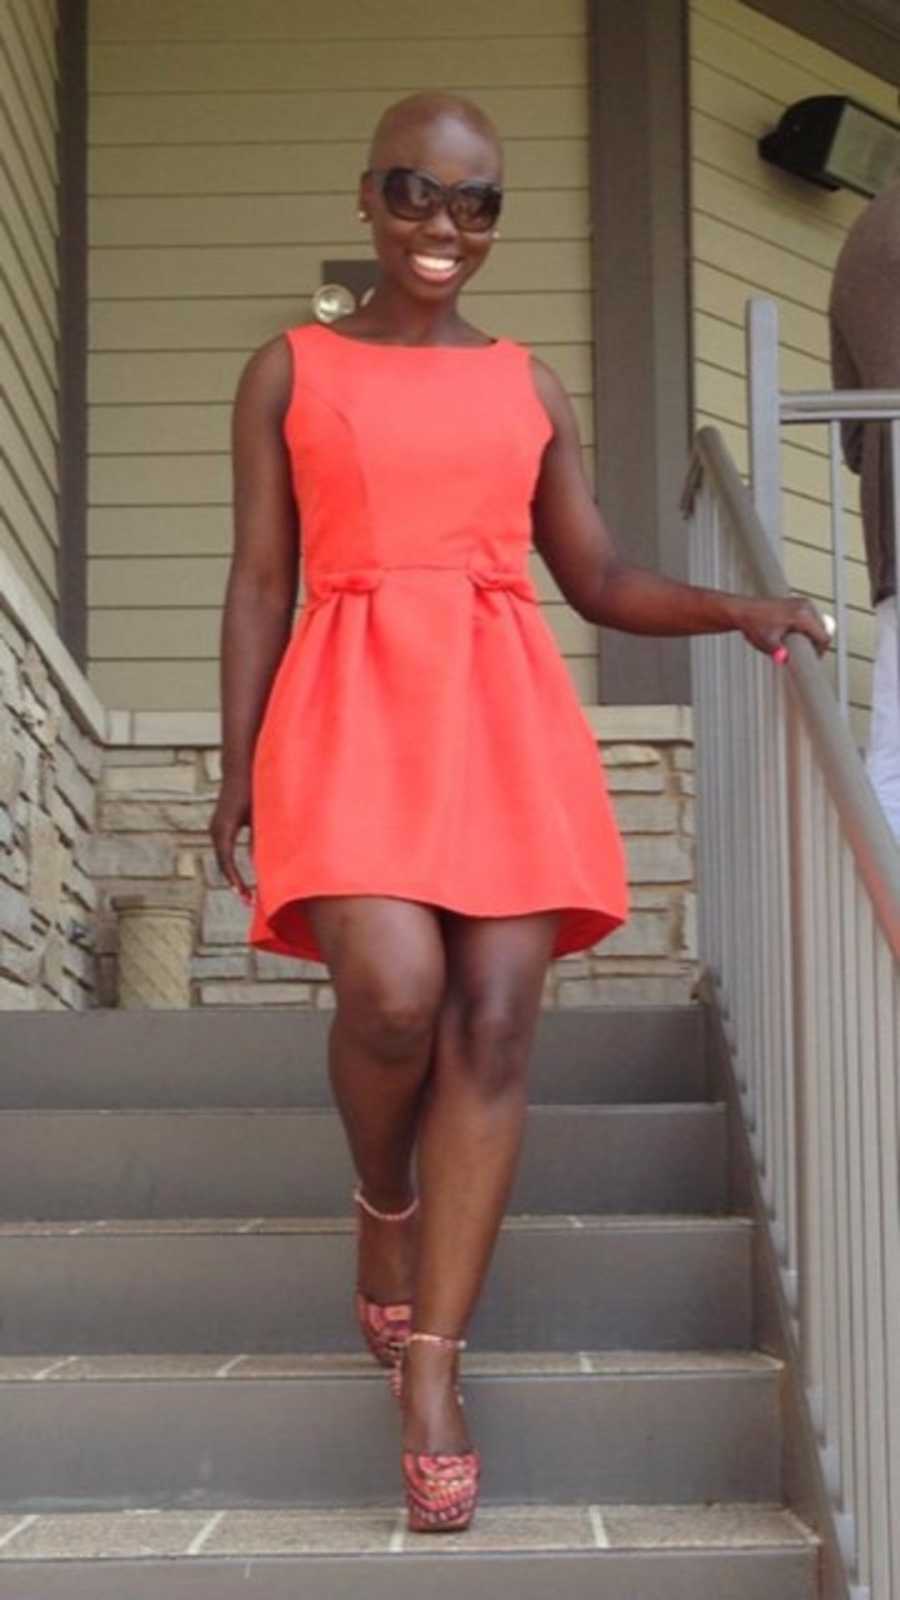 Young woman with stage 2 cancer stands smiling on steps in orange dress